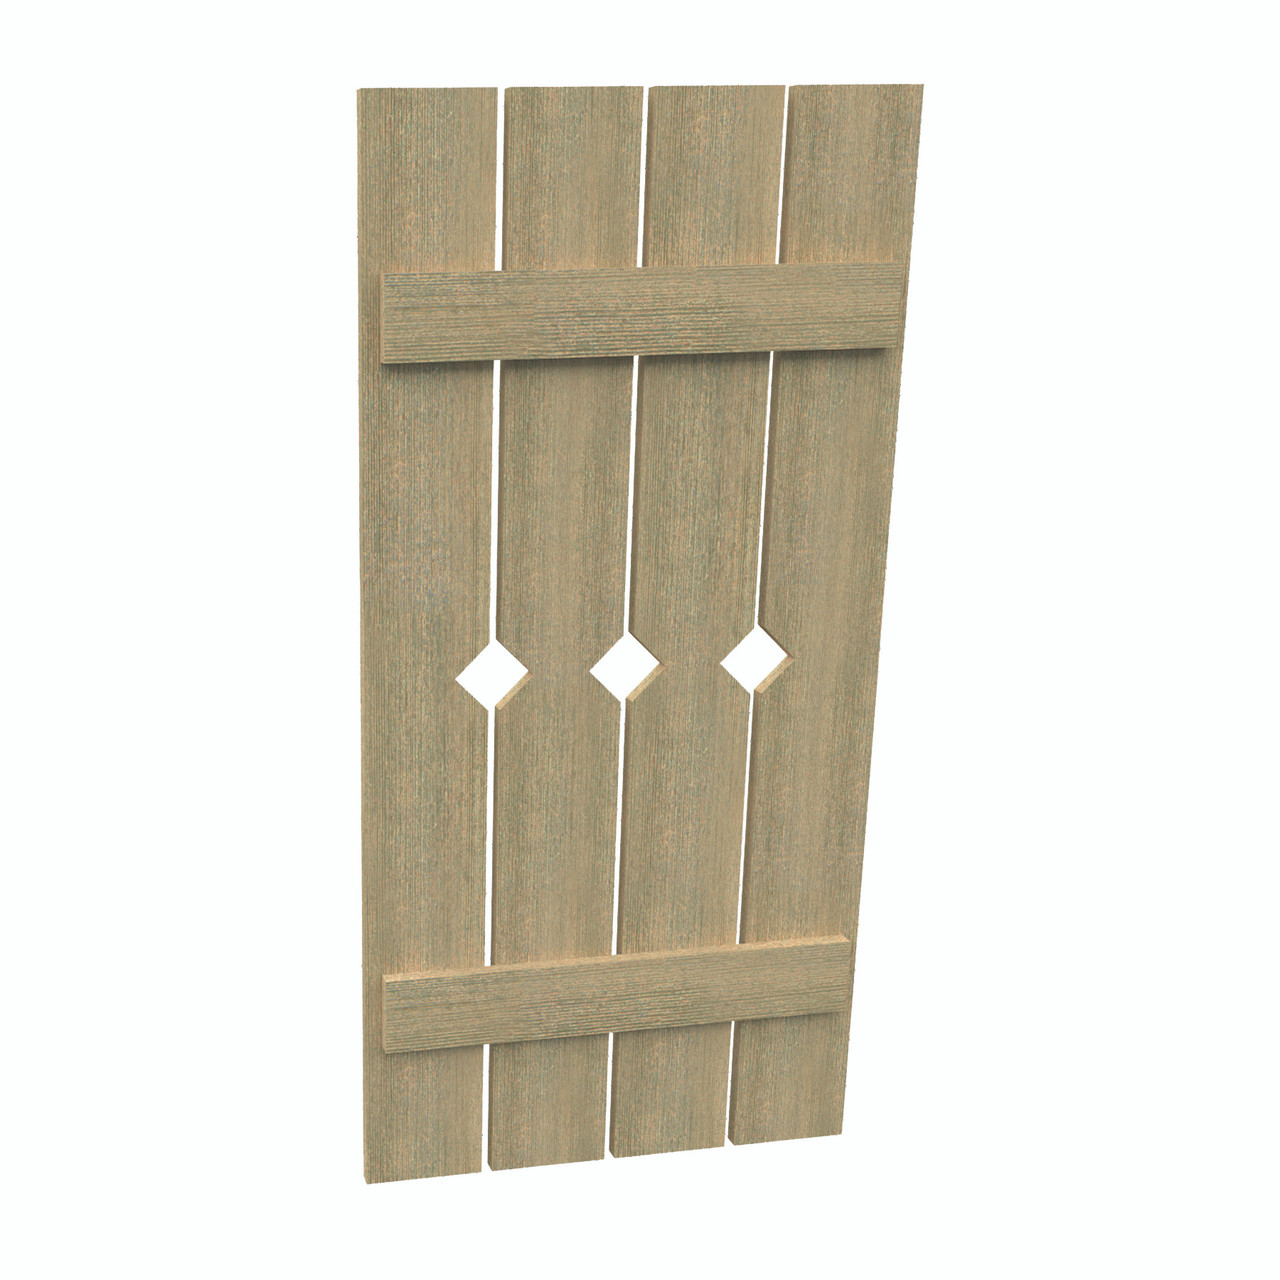 24 inch by 50 inch Plank Shutter with 4-Plank, Diamond